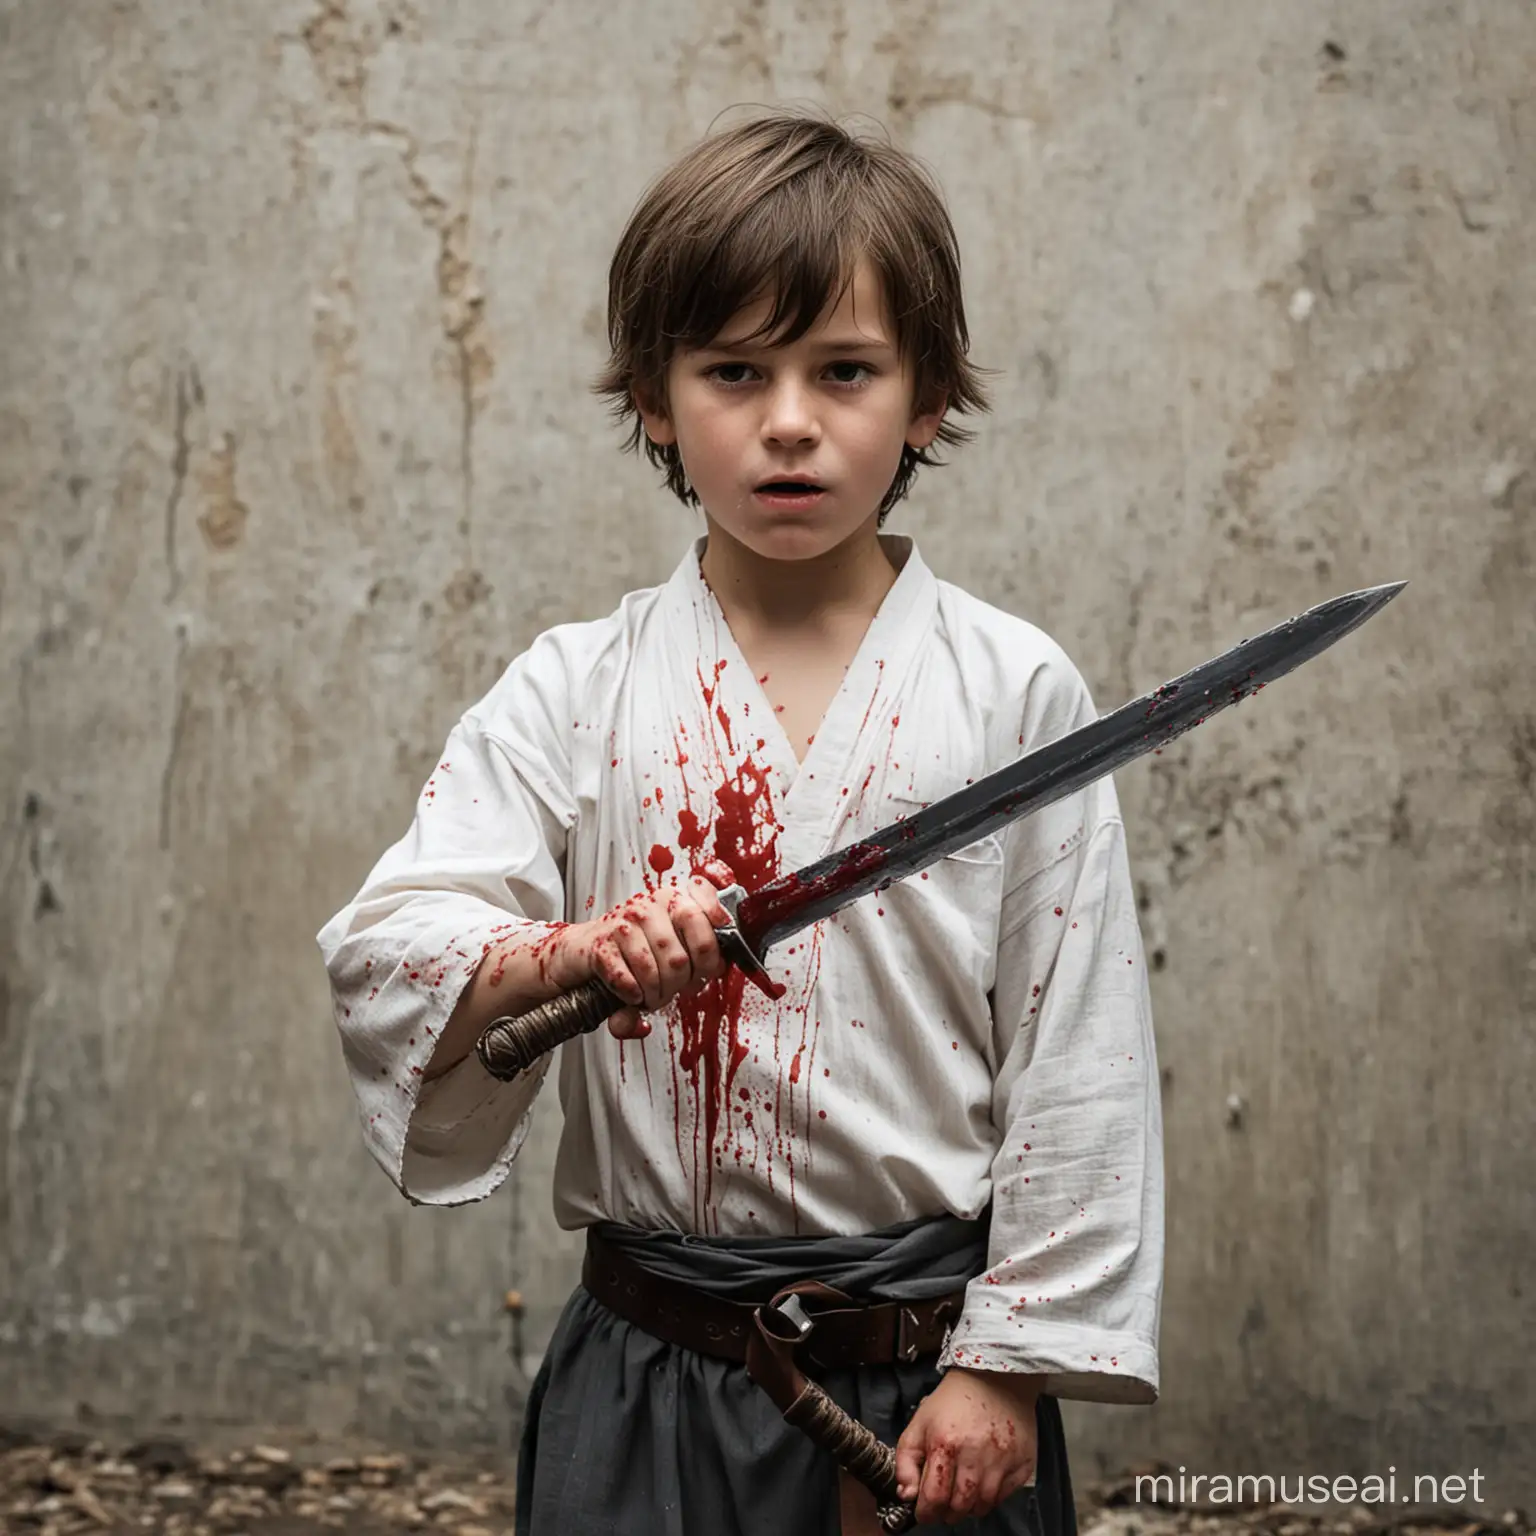 young boy bleeding from his hand holding a sword